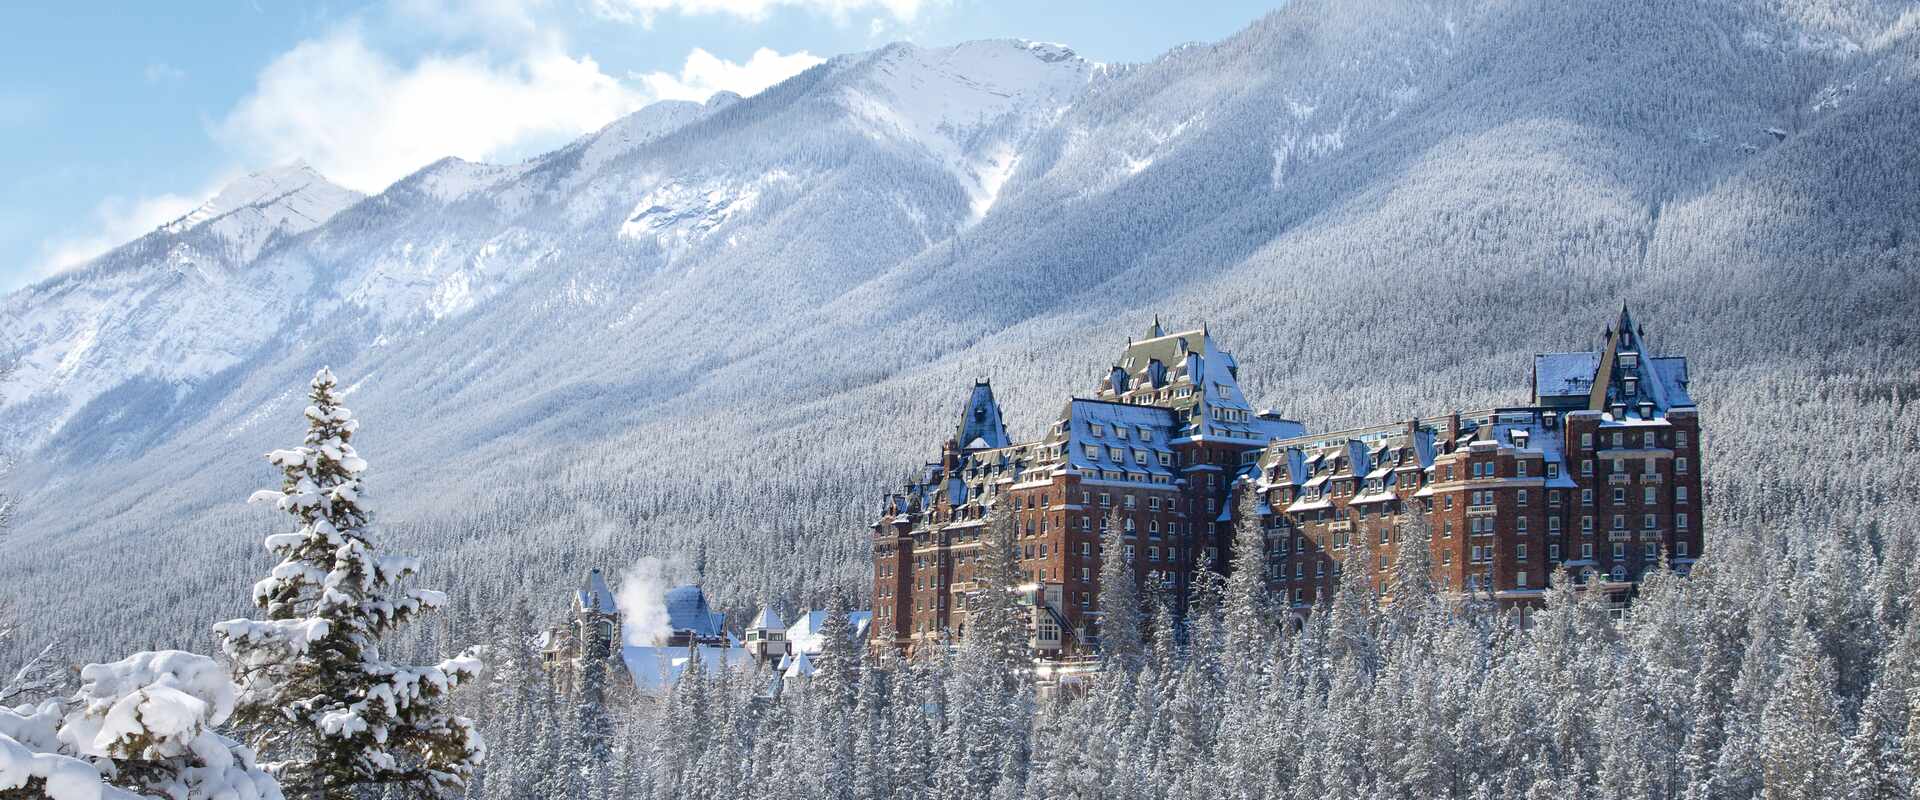 View of hotel in wither over snow covered tree tops, Canada